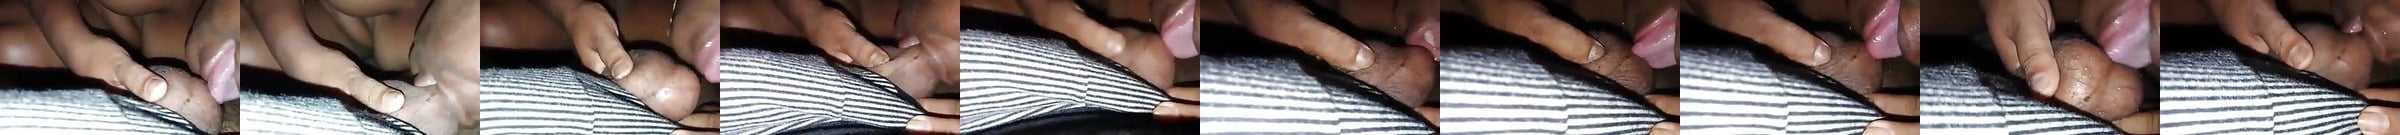 Licking Balls Porn Videos New Page 4